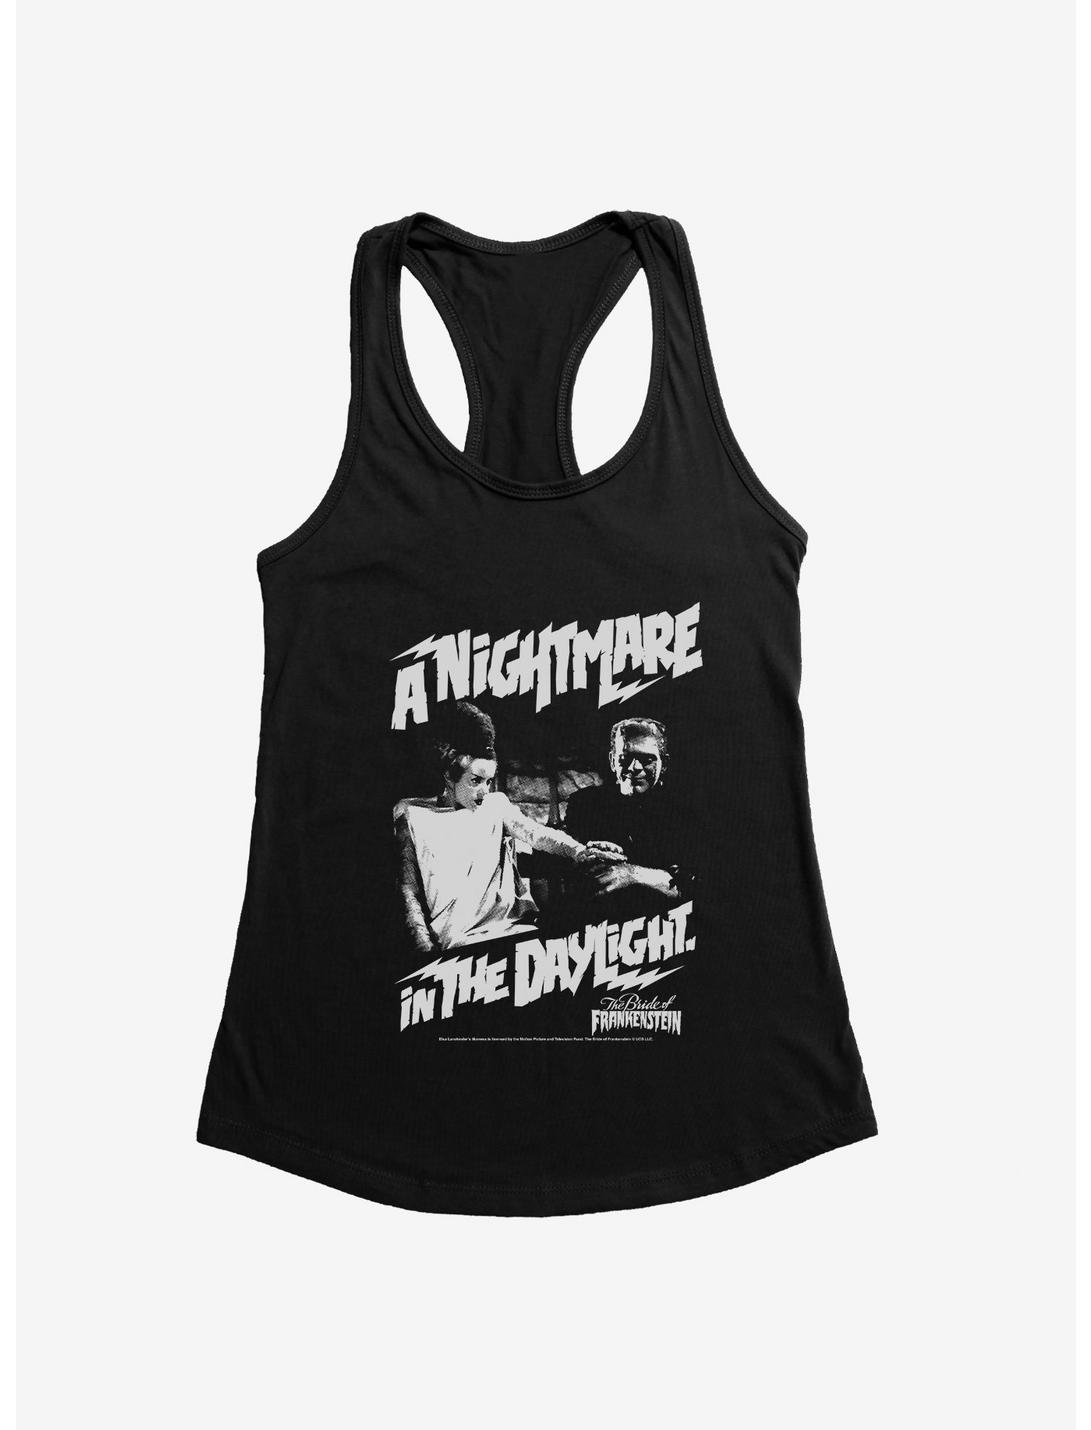 The Bride Of Frankenstein A Nightmare In The Daylight Womens Tank Top, BLACK, hi-res